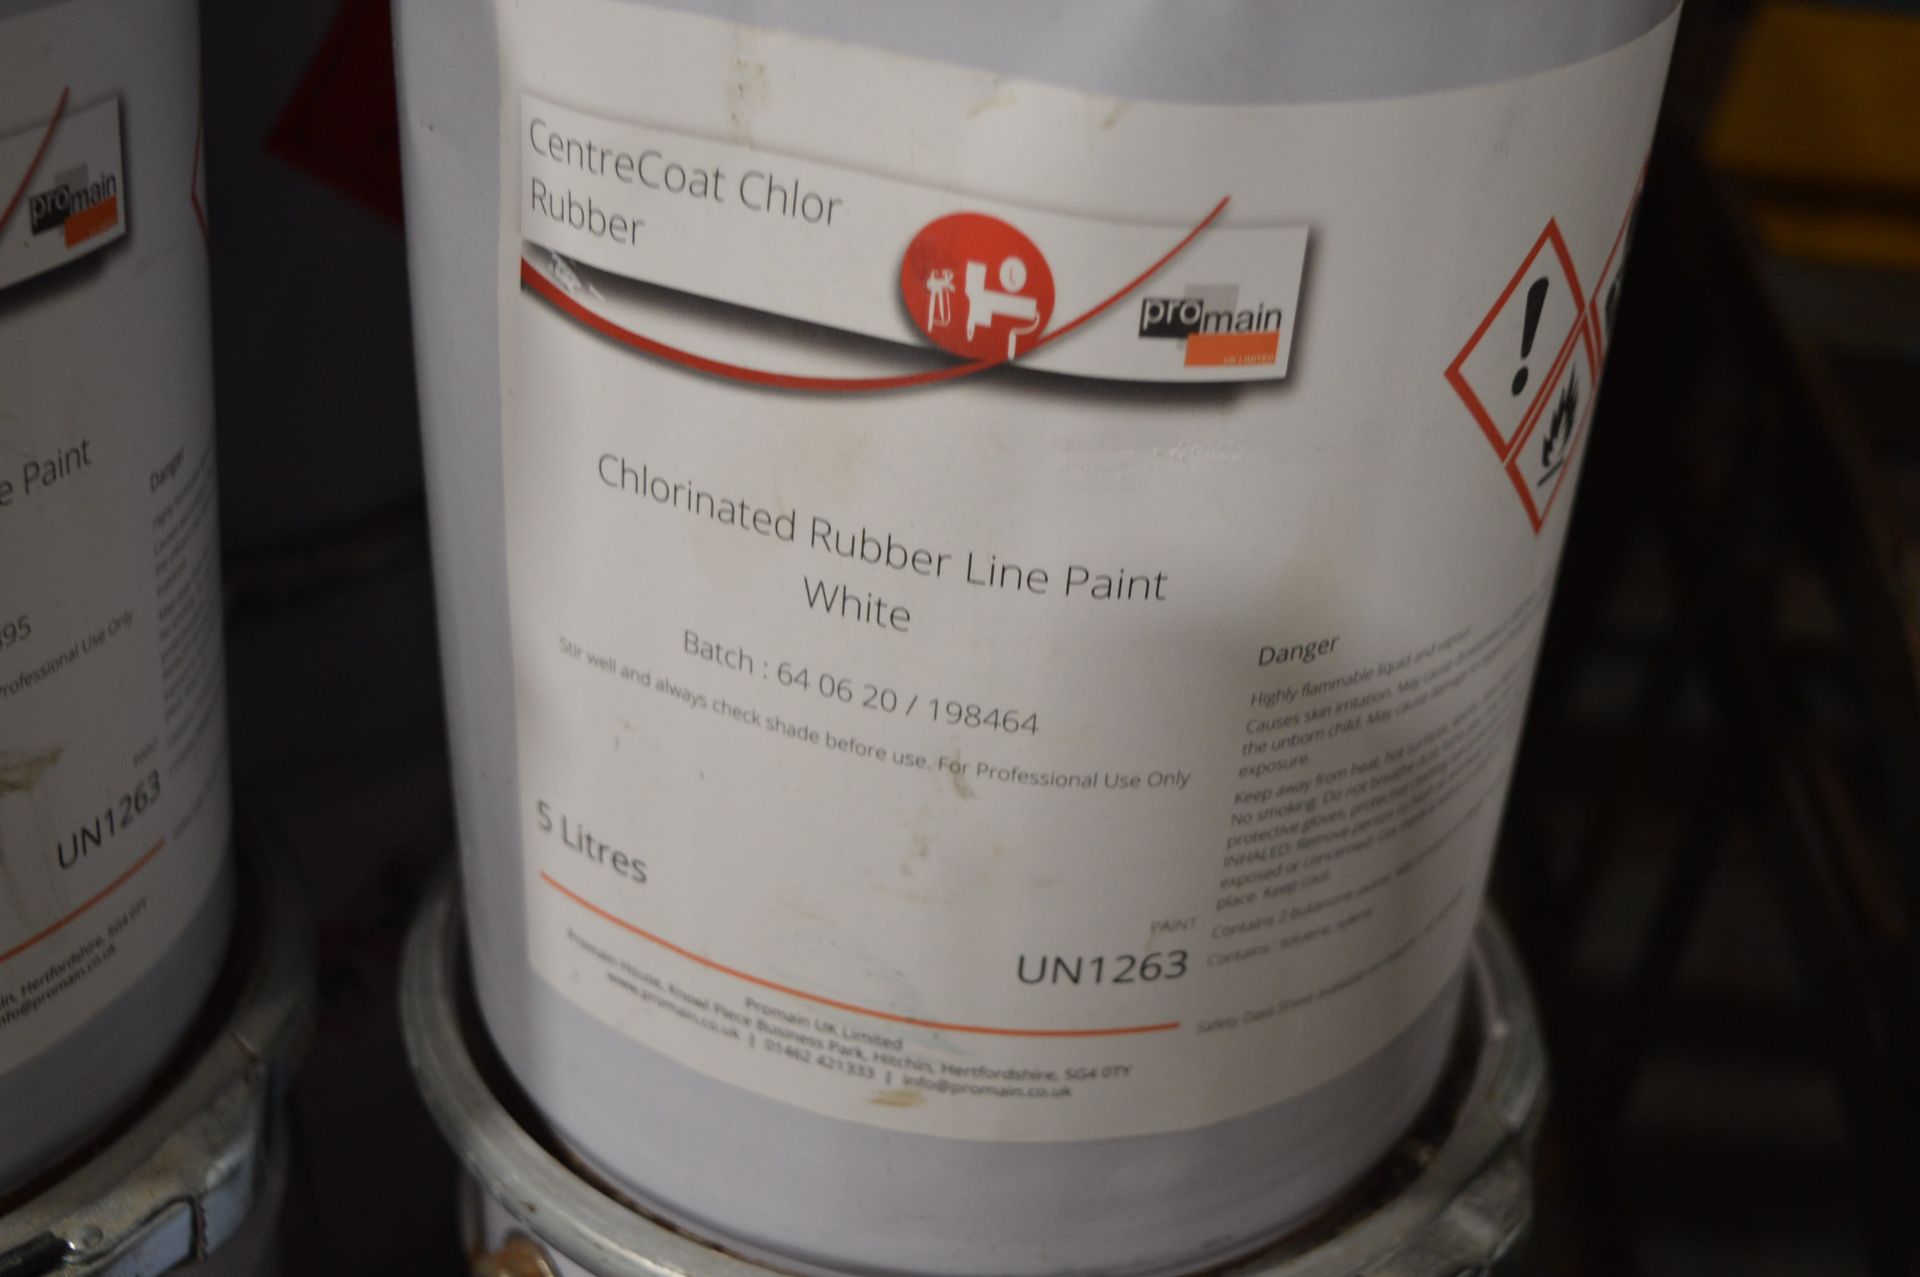 *6x 5L of Chlorinated Rubber Lined Paint (white)